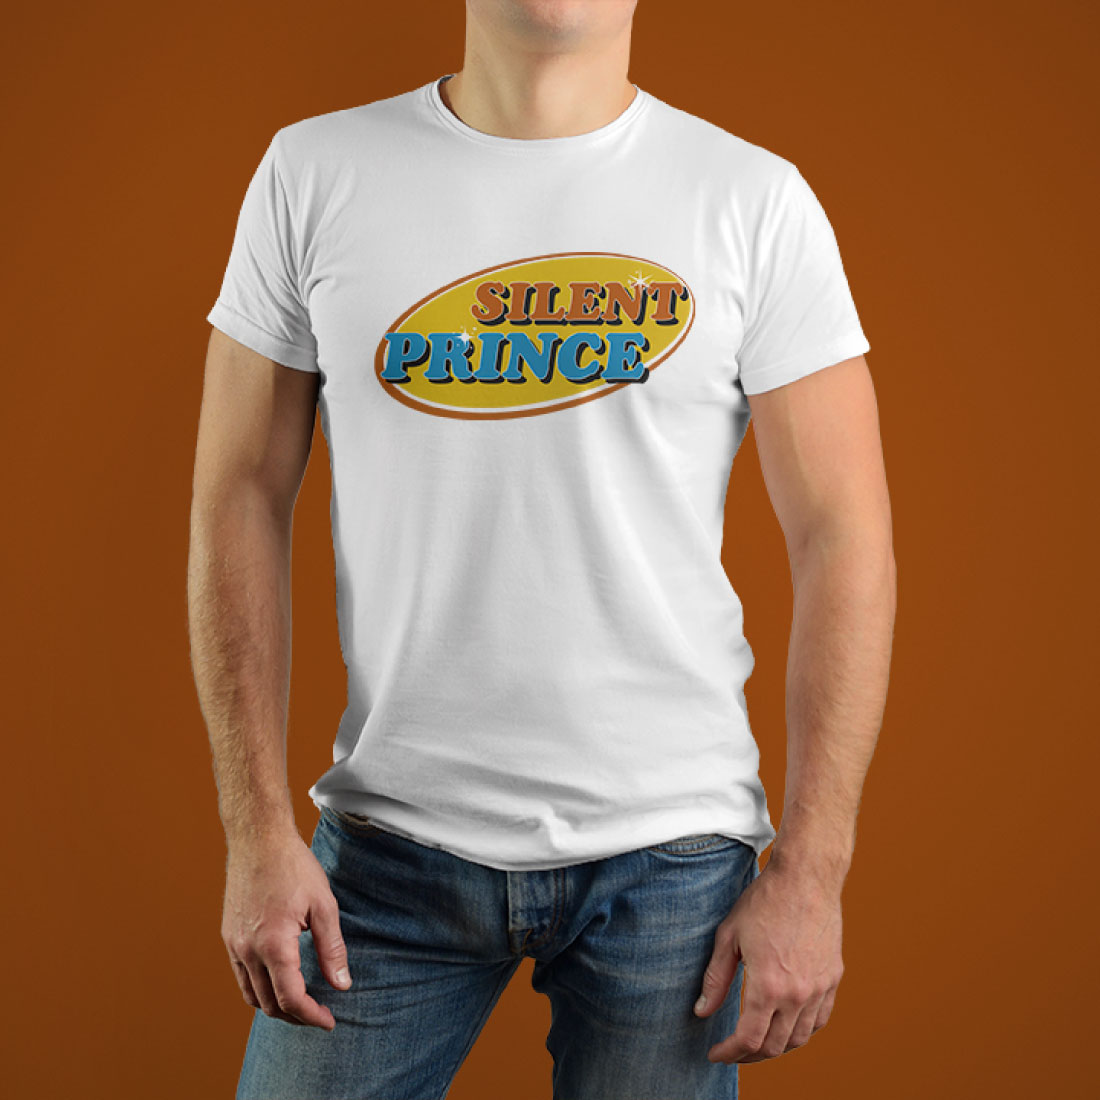 Silent Prince T Shirt Design cover image.